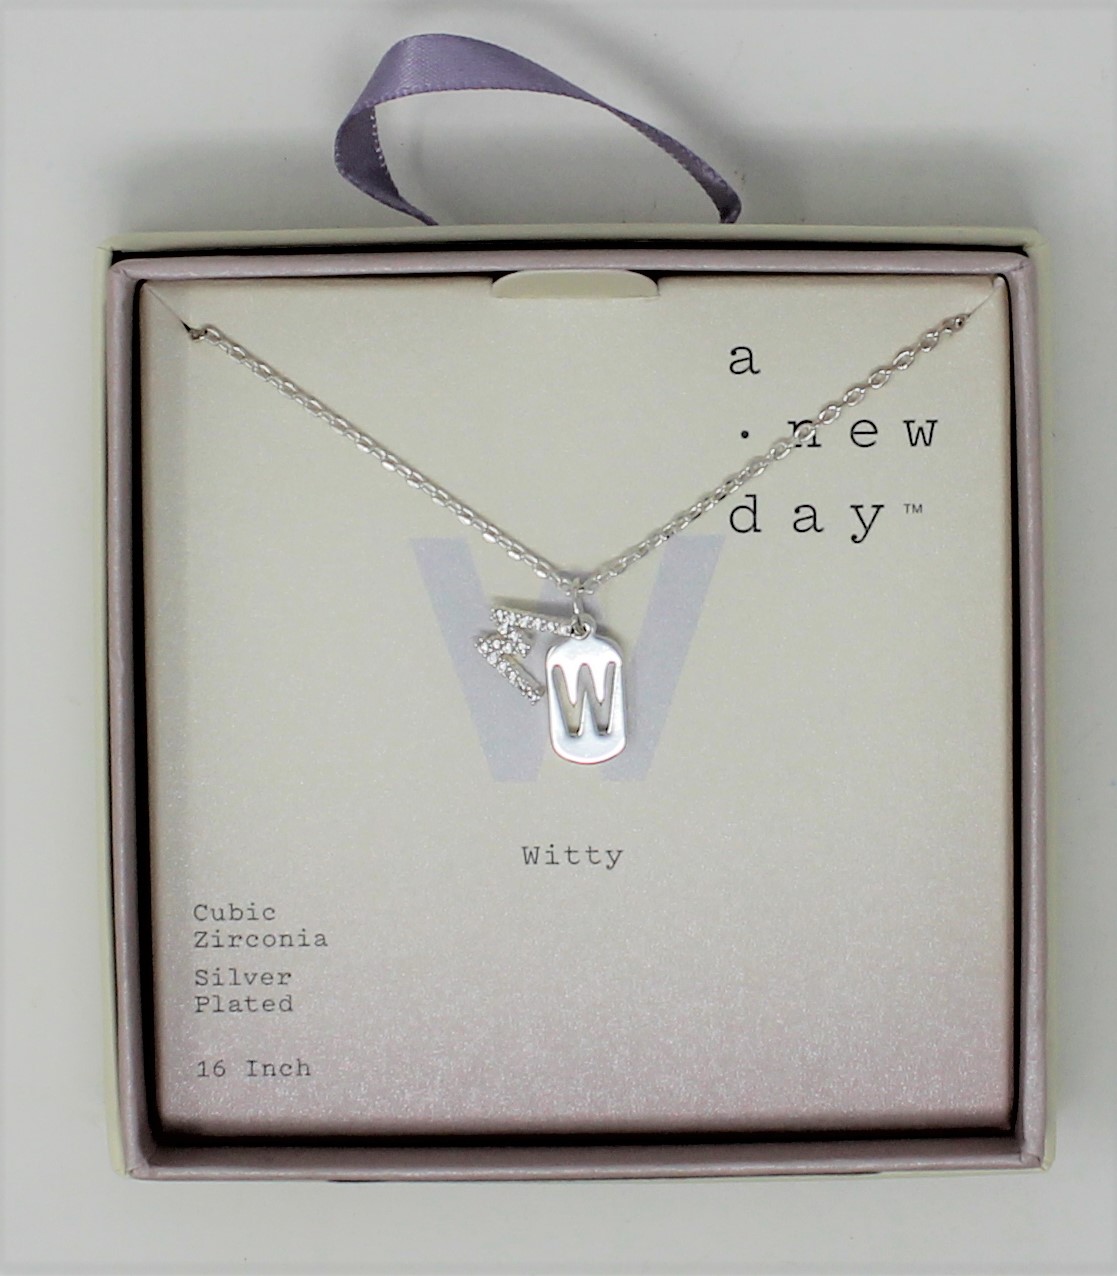 "WITTY" CUBIC ZIRCONIA SILVER PLATED 16 INCH NECKLACE - Click Image to Close